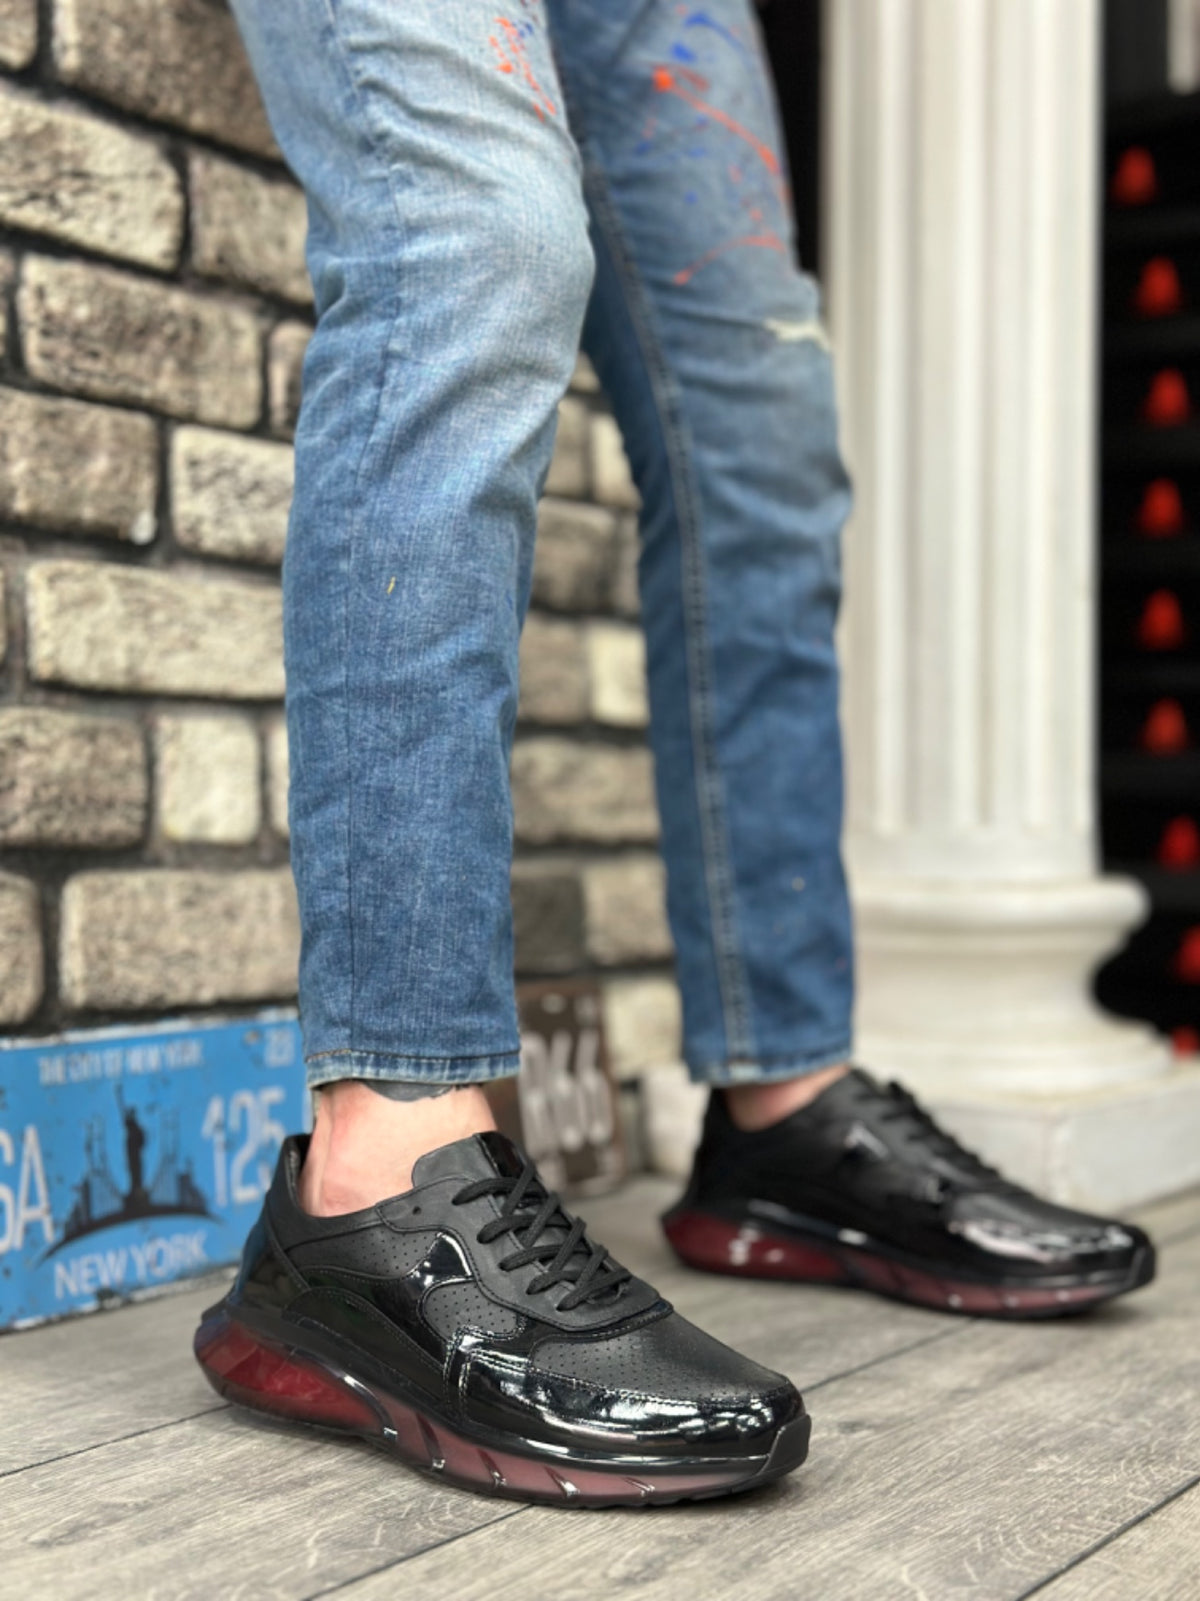 BA0324 Inside and Outside Genuine Leather Comfortable Sole Black Red Sneakers Casual Men's Shoes - STREETMODE™